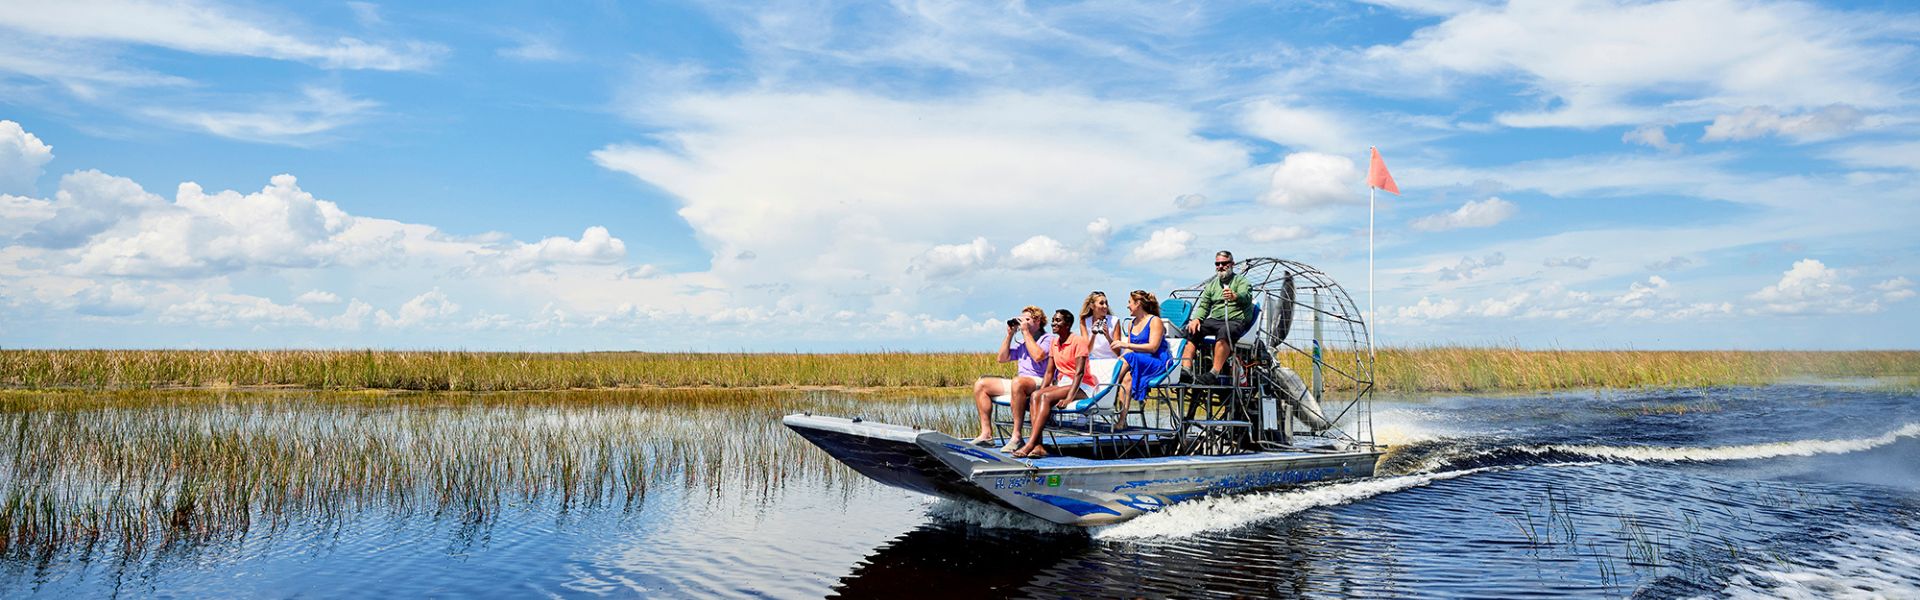 Fort Lauderdale and Pompano Beach campaign page accessible airboat 10Aug23